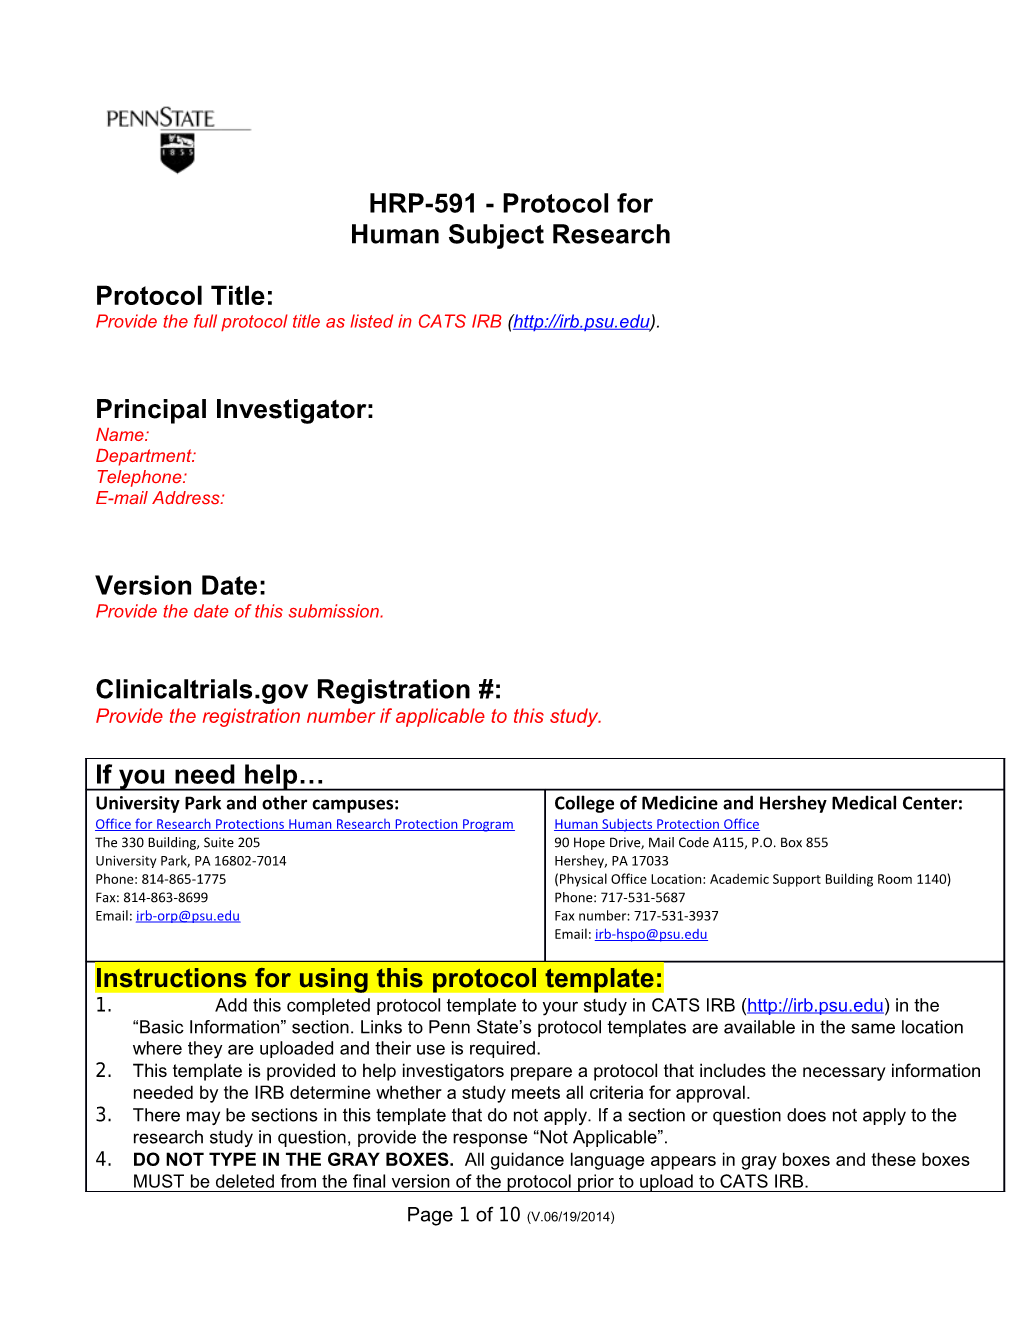 HRP-591 - Protocol For